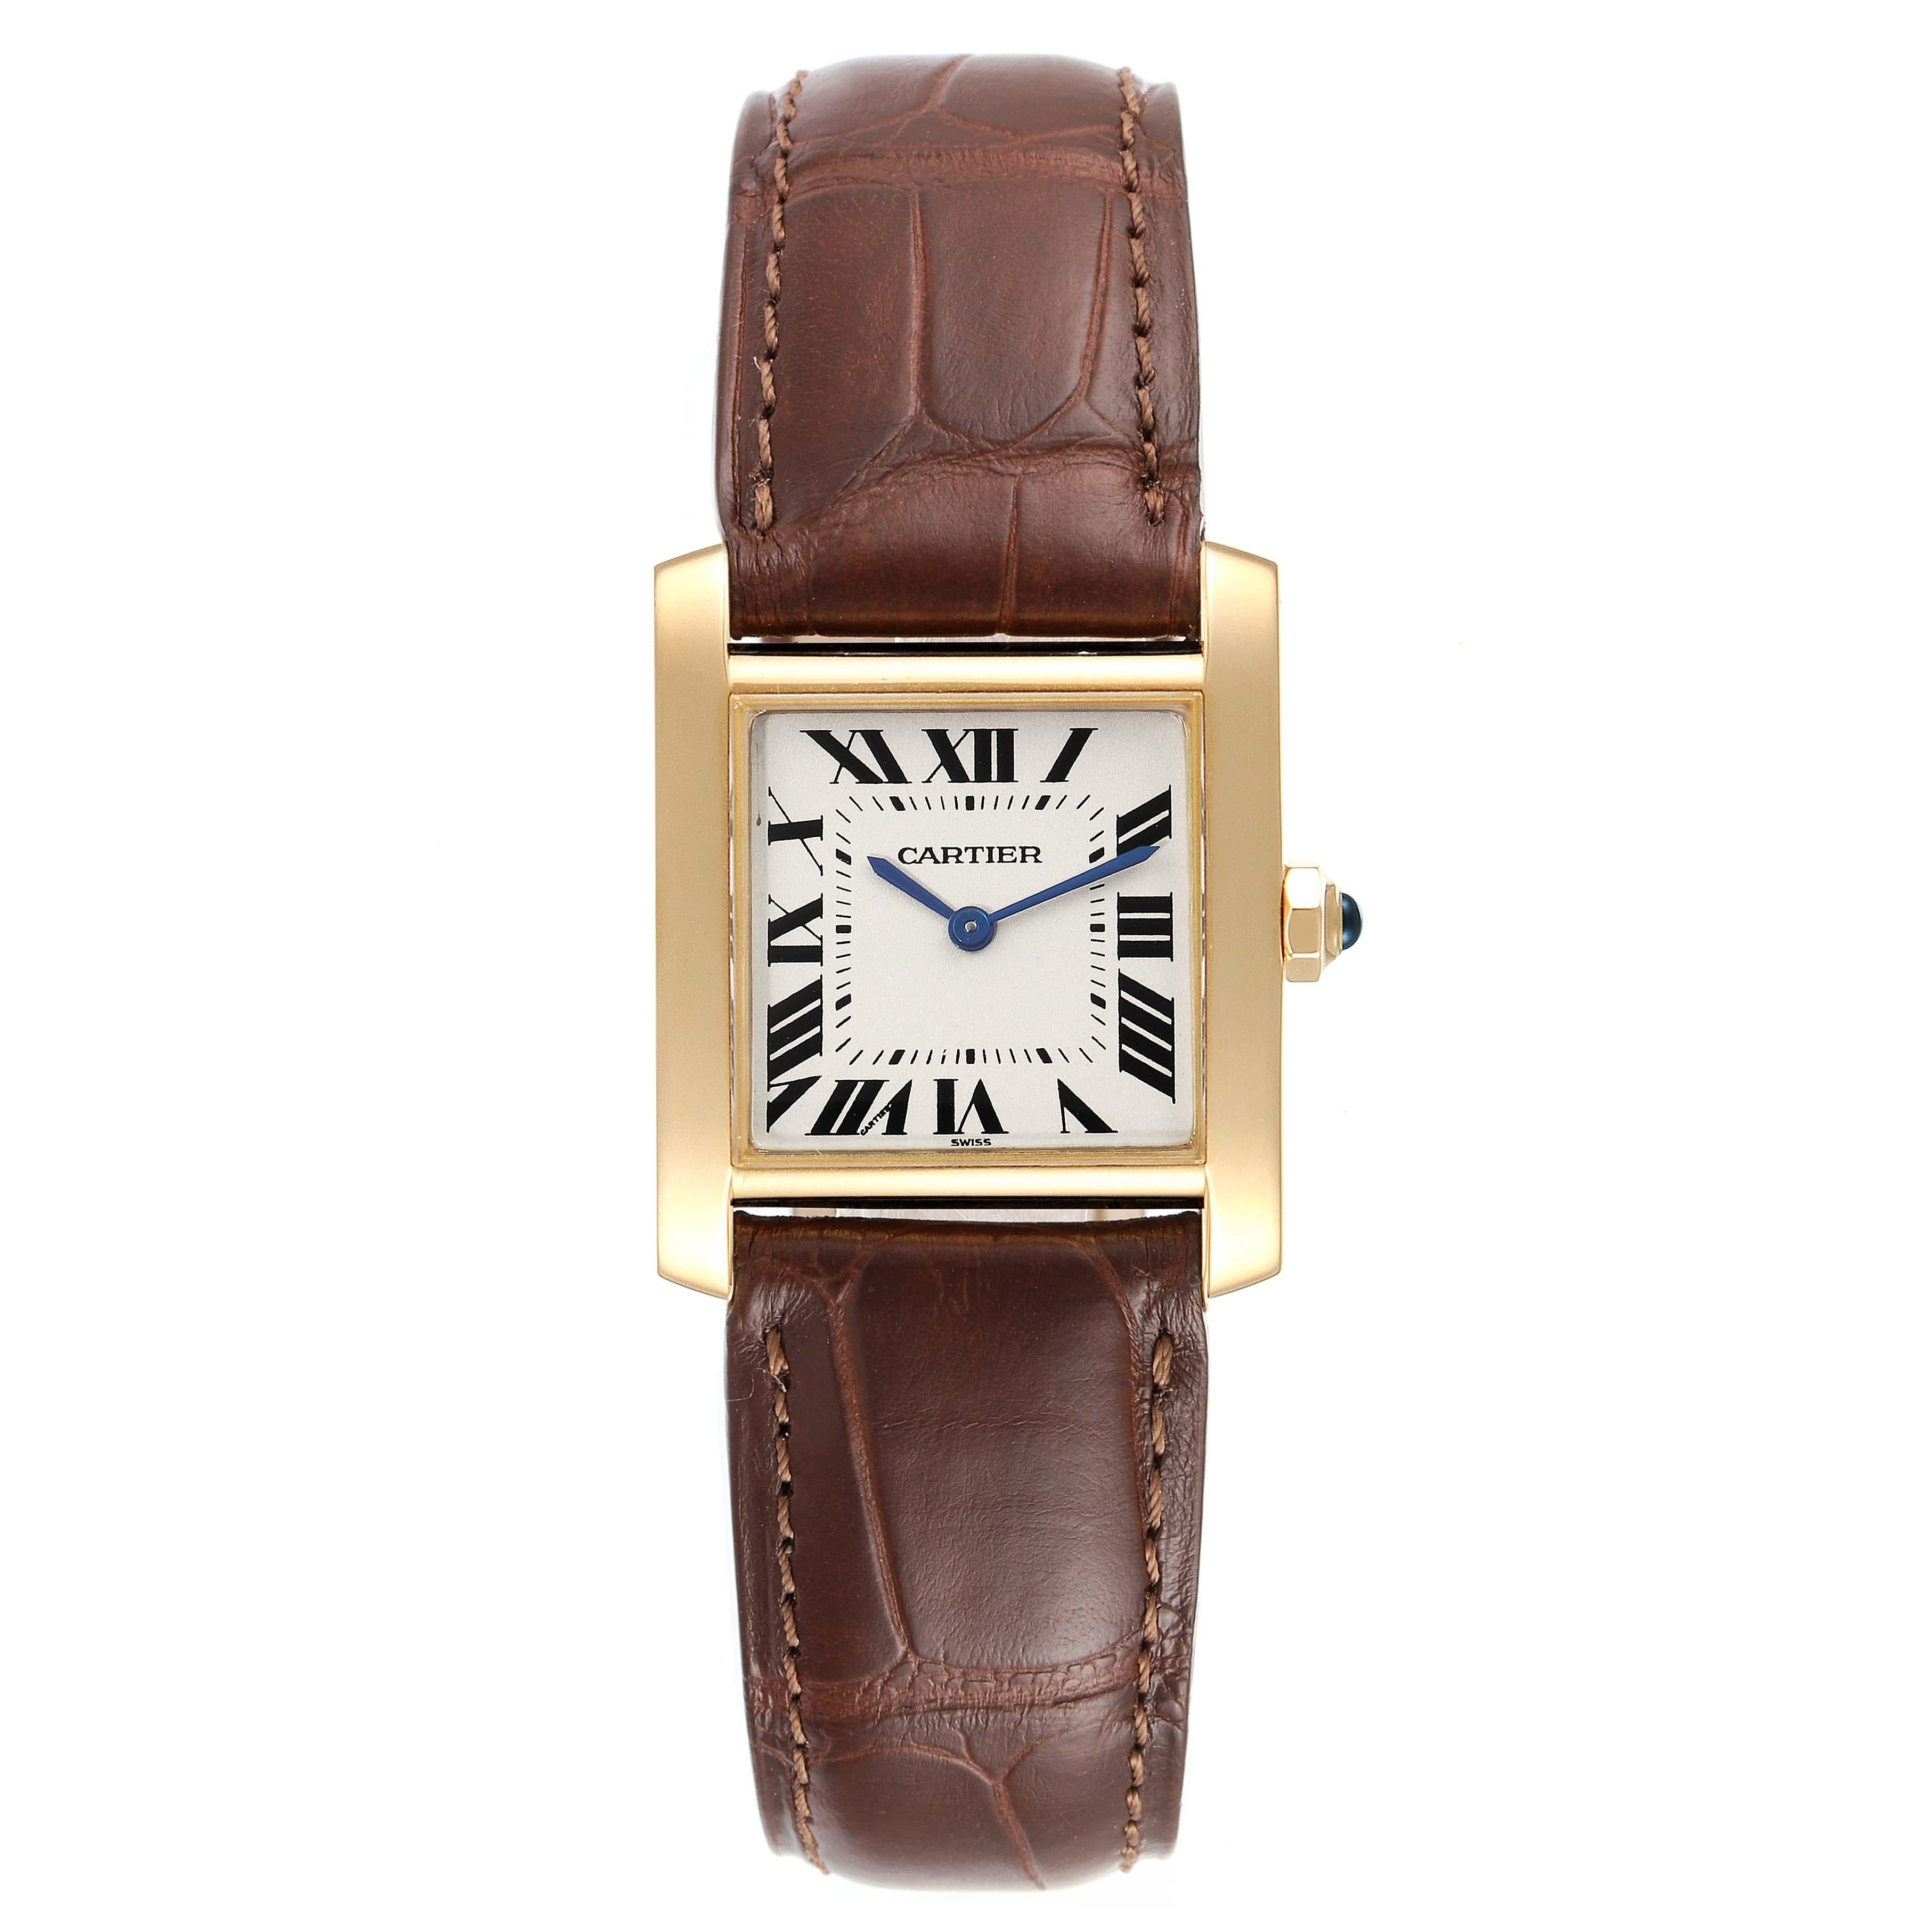 Cartier Tank Francaise Midsize Yellow Gold Ladies Watch W5000356 In Excellent Condition For Sale In Atlanta, GA